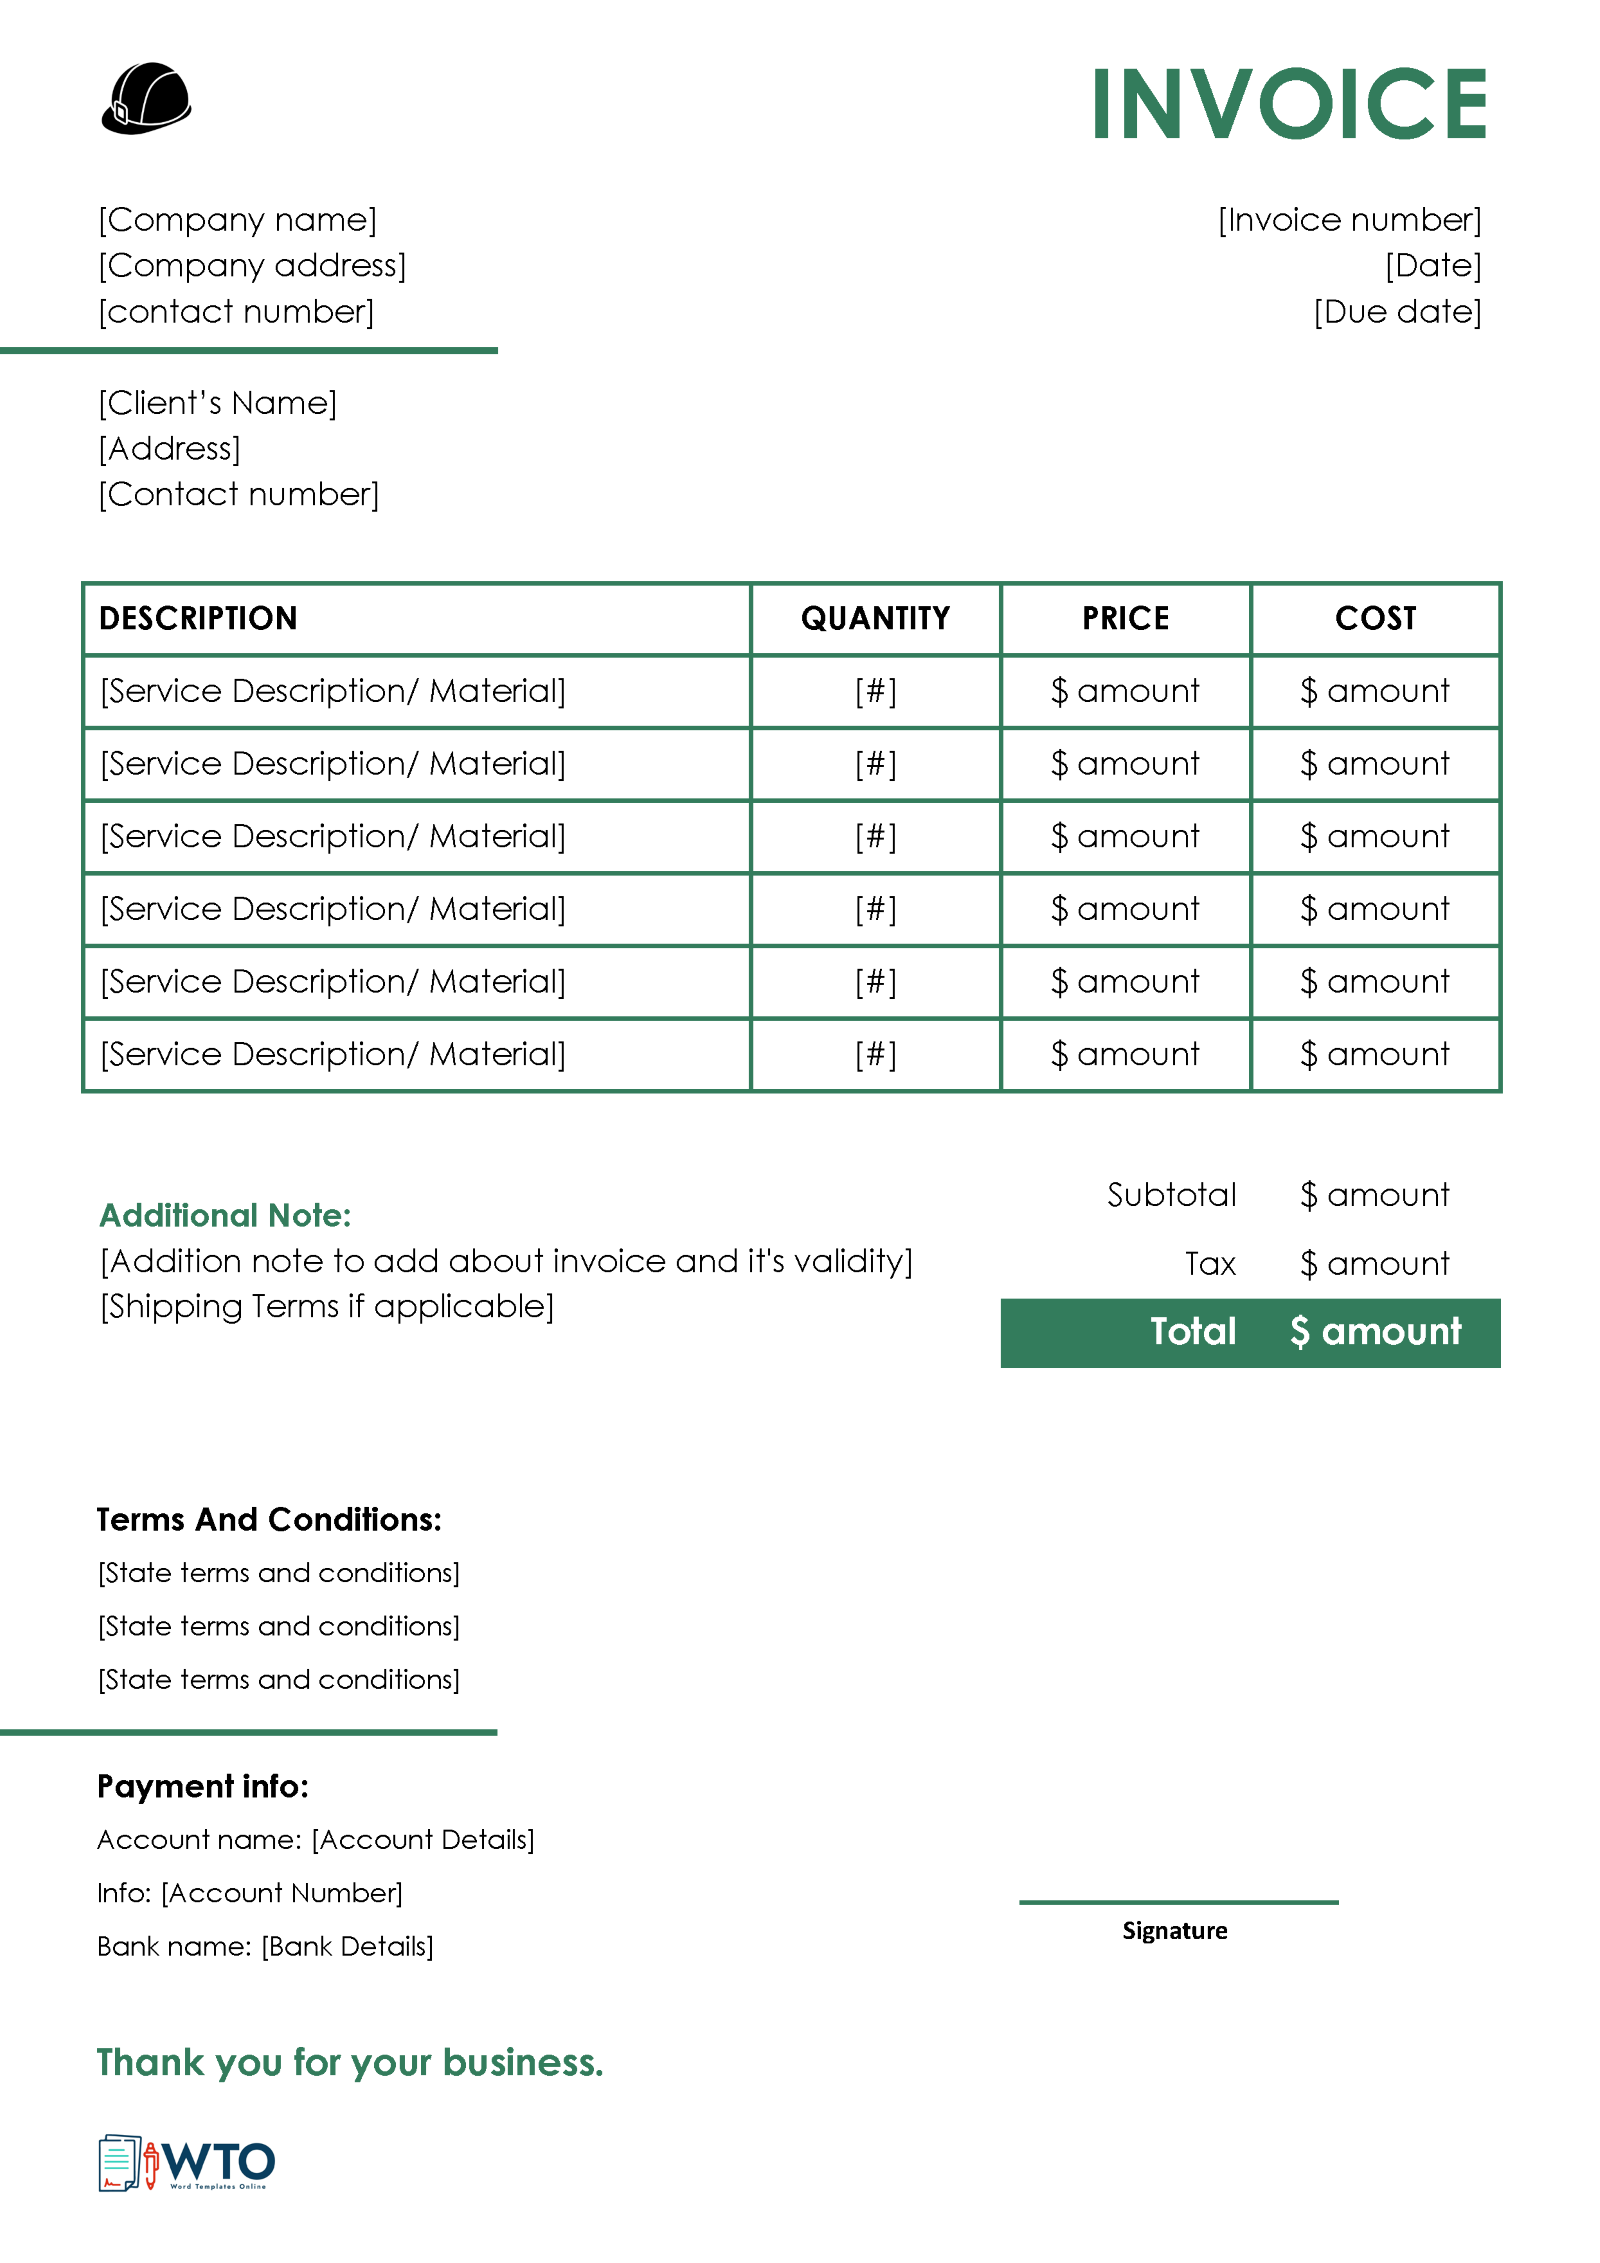 Building Your Construction Invoice - Template